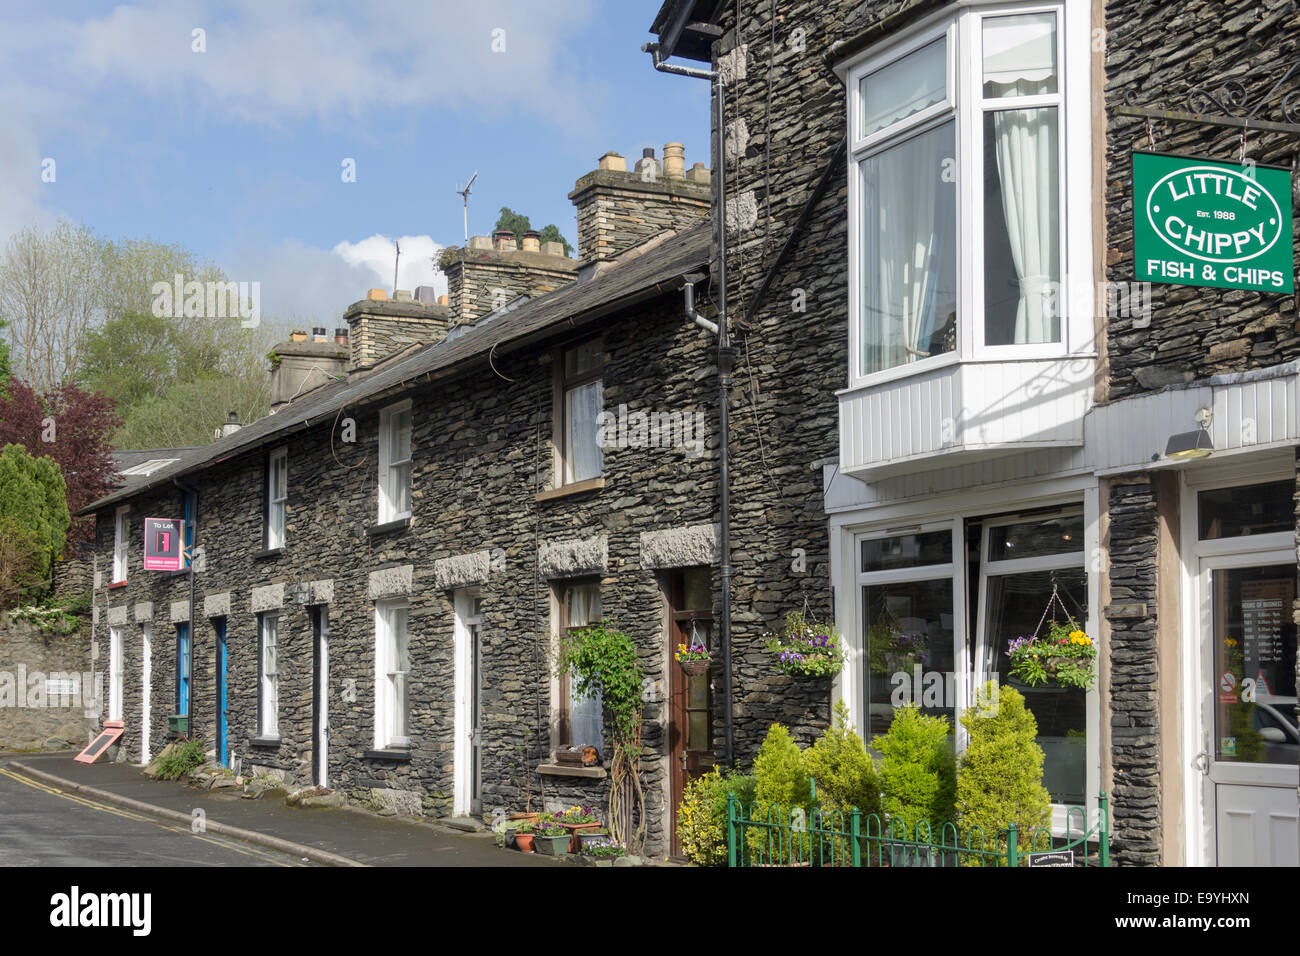 Lakeland terraced cottages in Windermere, with the Little Chippy, a traditional English fish and chip shop on Beech Street, Windermere, Cumbria, Stock Photo